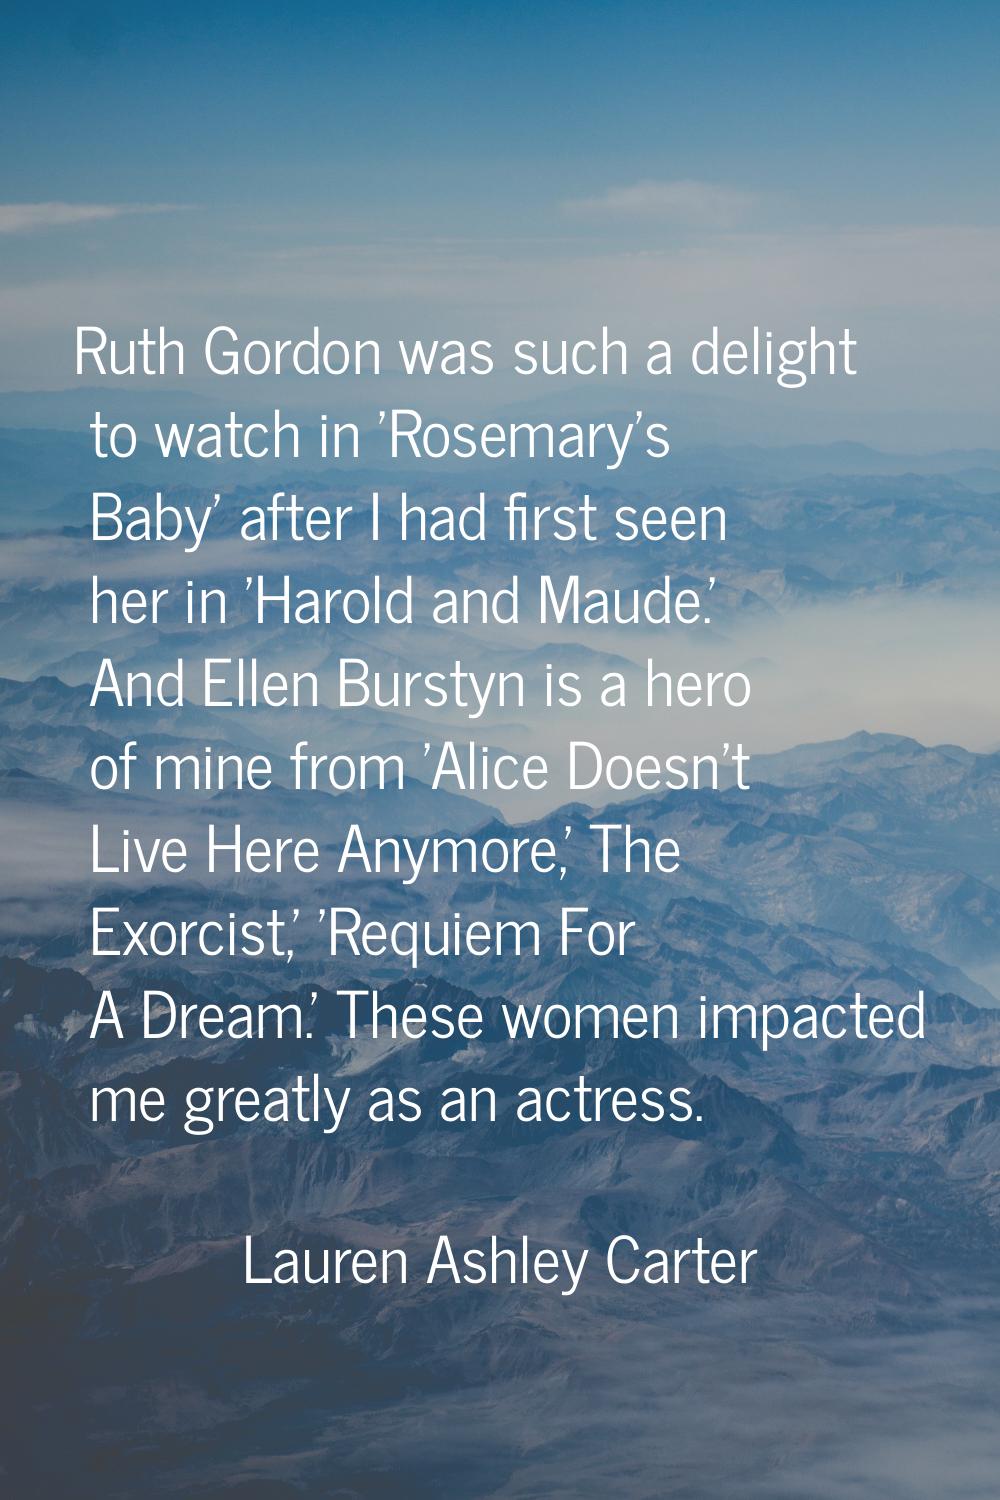 Ruth Gordon was such a delight to watch in 'Rosemary's Baby' after I had first seen her in 'Harold 